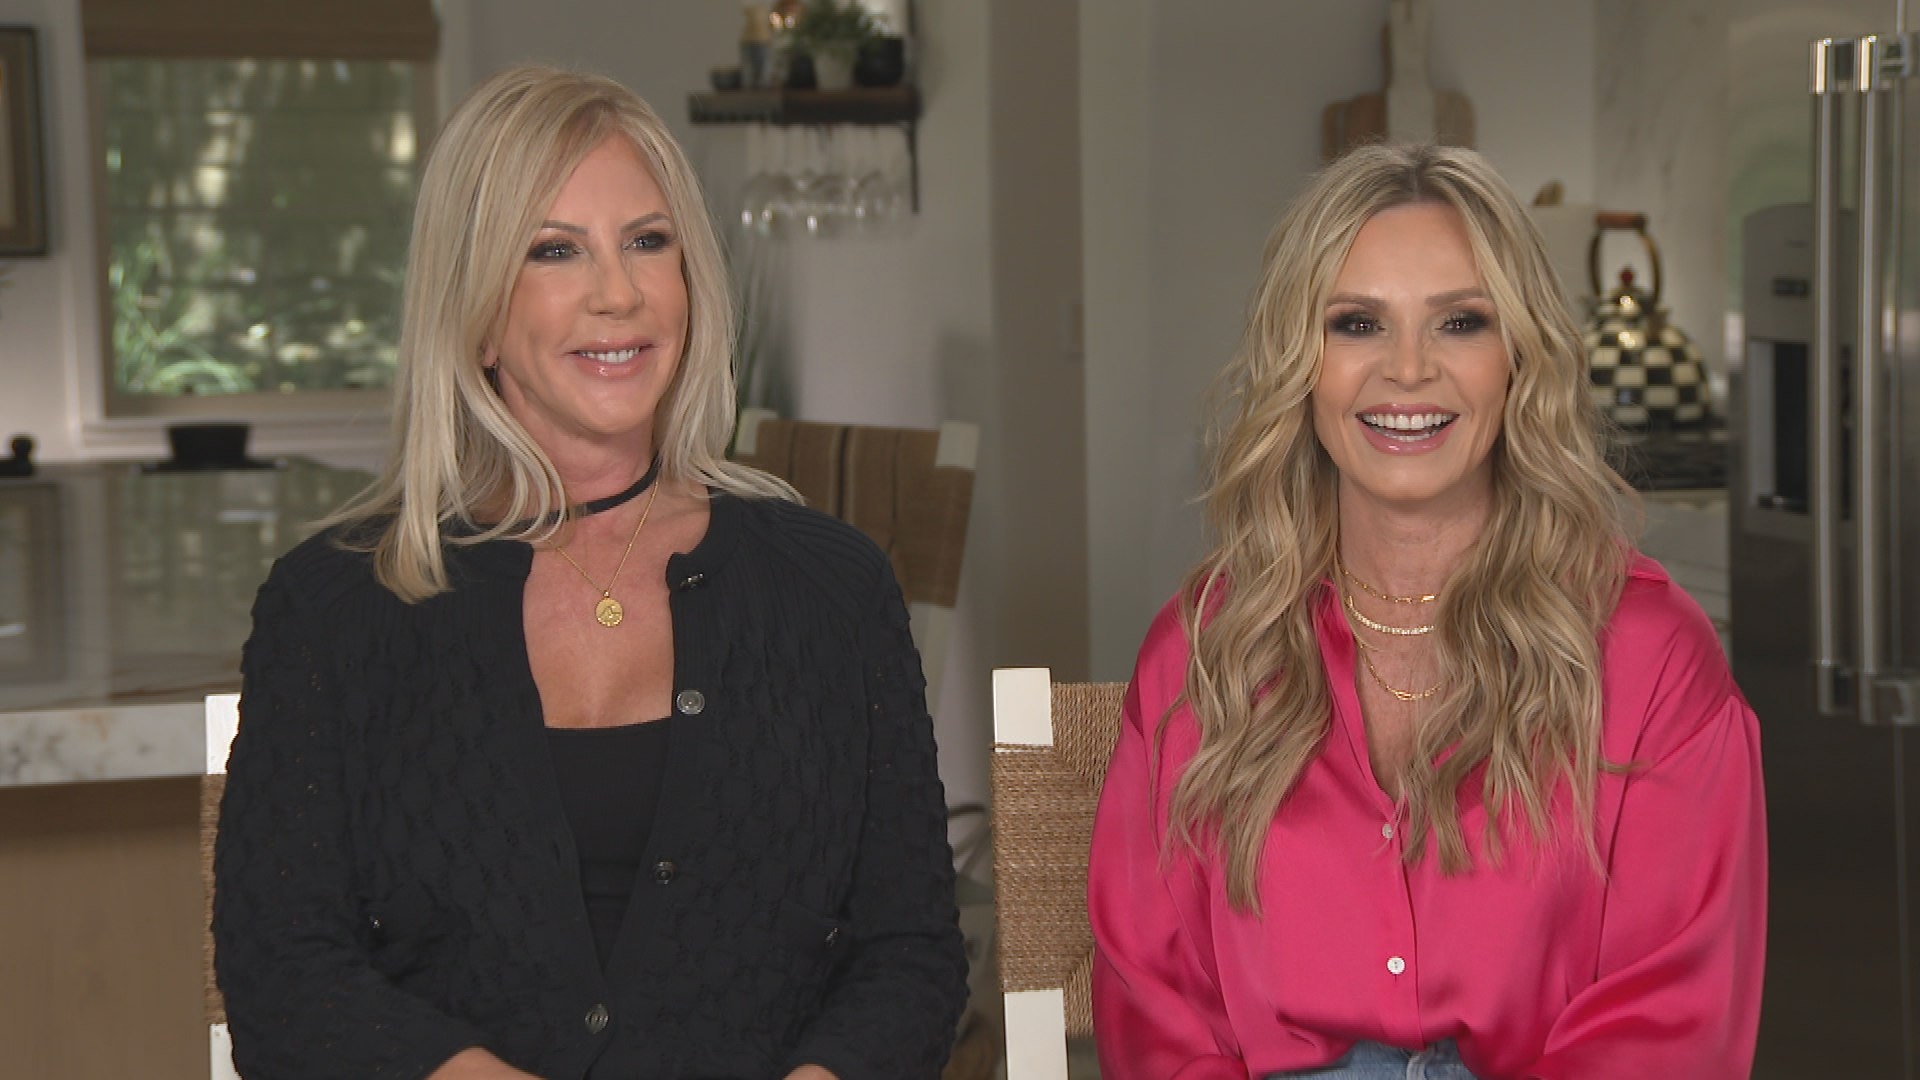 Tamra Judge and Vicki Gunvalson Offer Tres Amigas Update With Shannon Beador (Exclusive) Entertainment Tonight